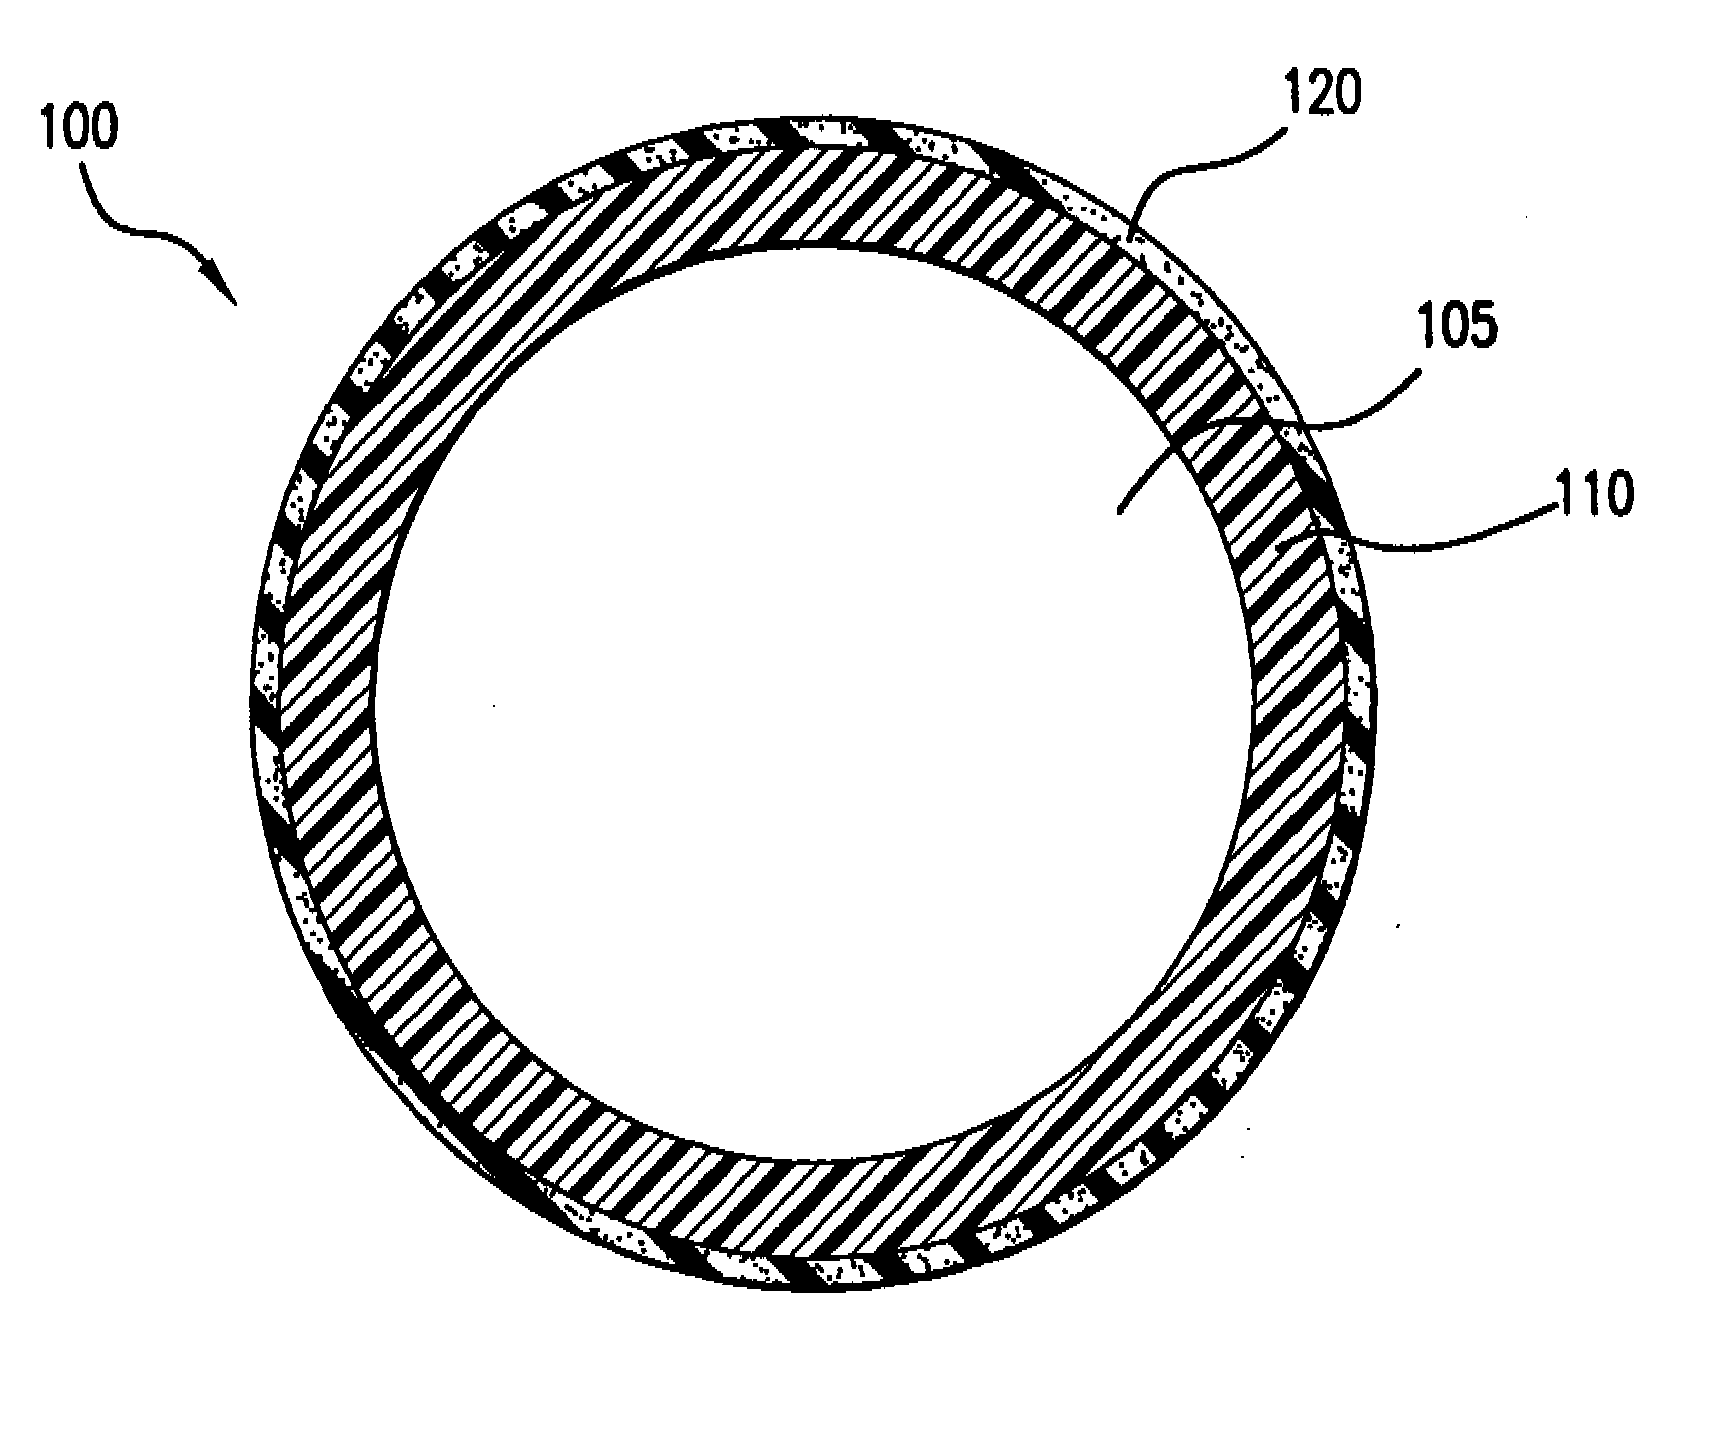 Anti-biofouling seismic streamer casing and method of manufacture